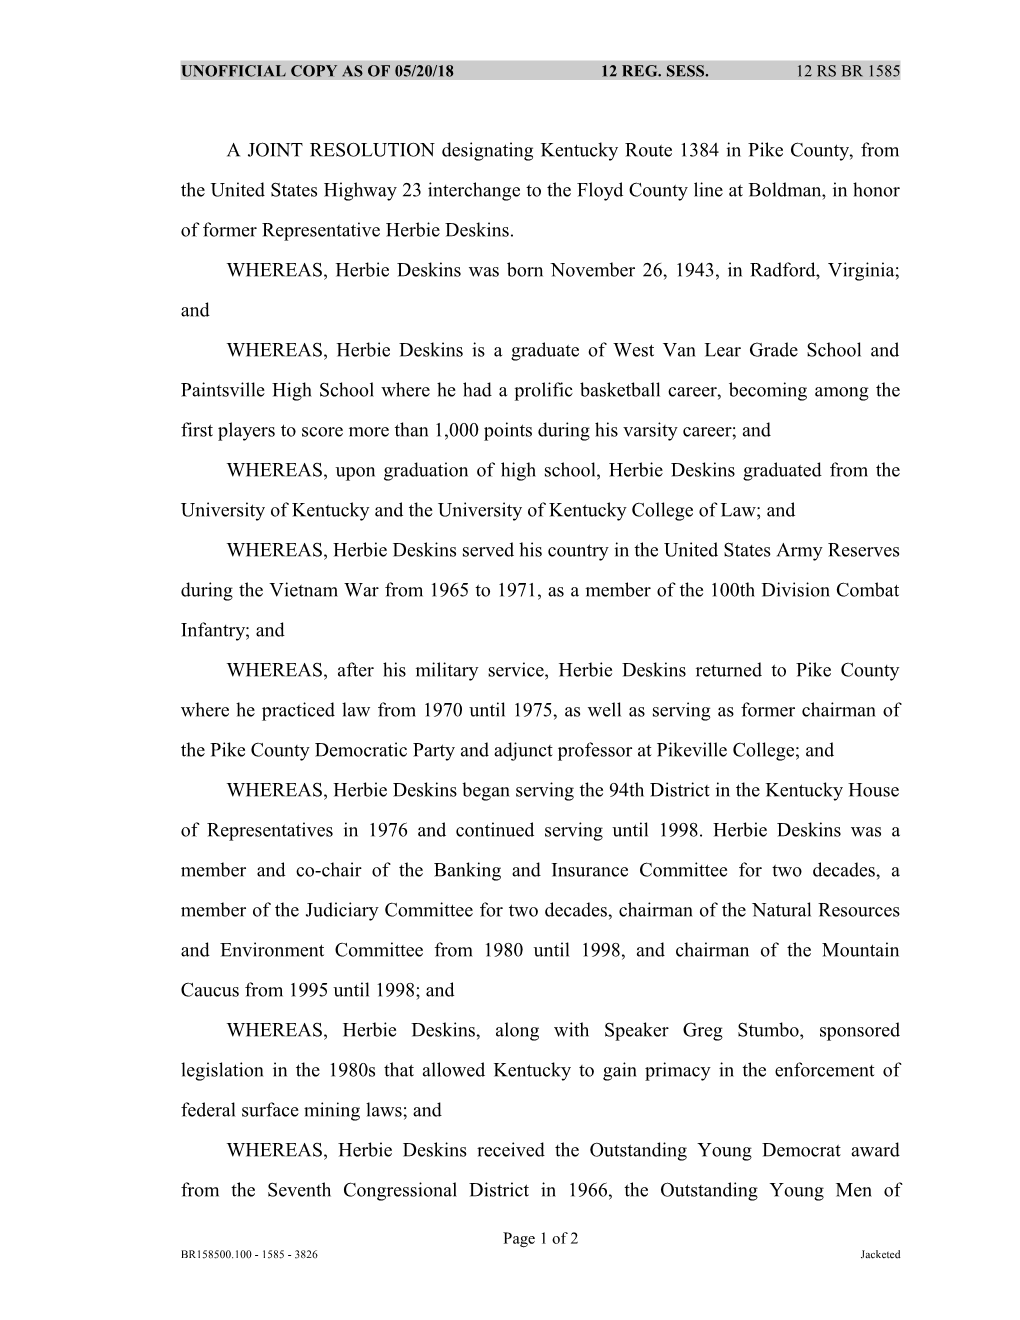 A JOINT RESOLUTION Designating Kentucky Route 1384 in Pike County, from the United States